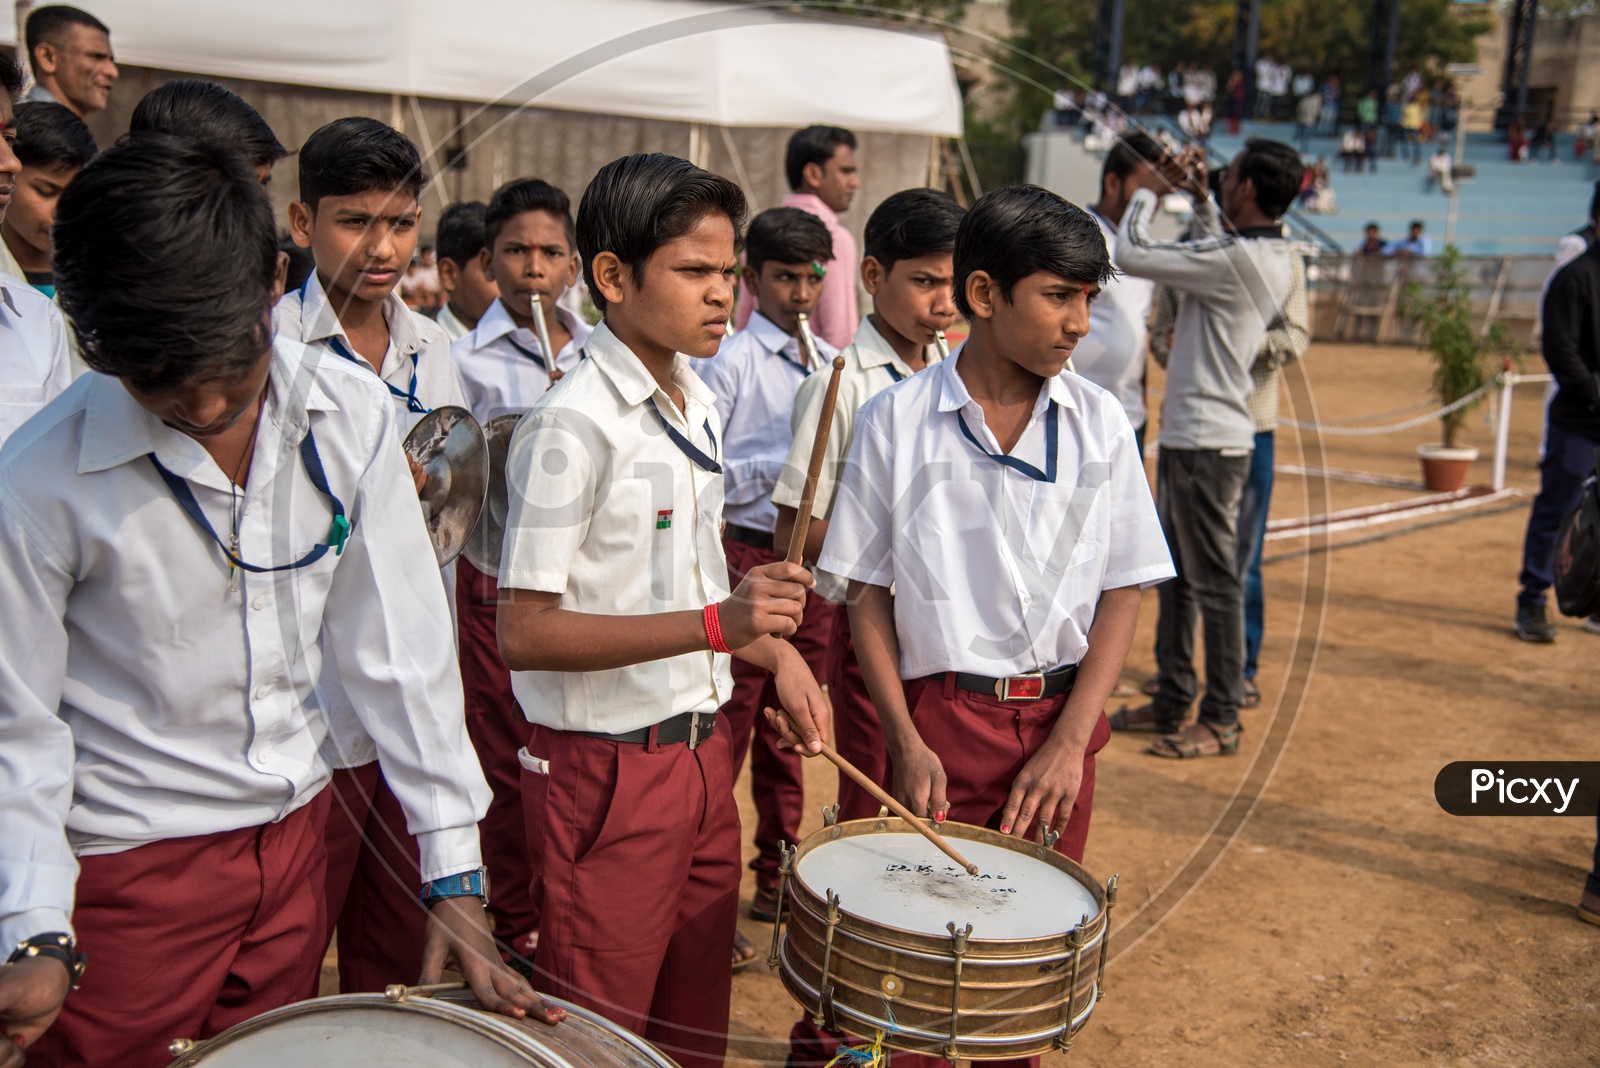 Indian School Children With School Band Drums  In an Assembly